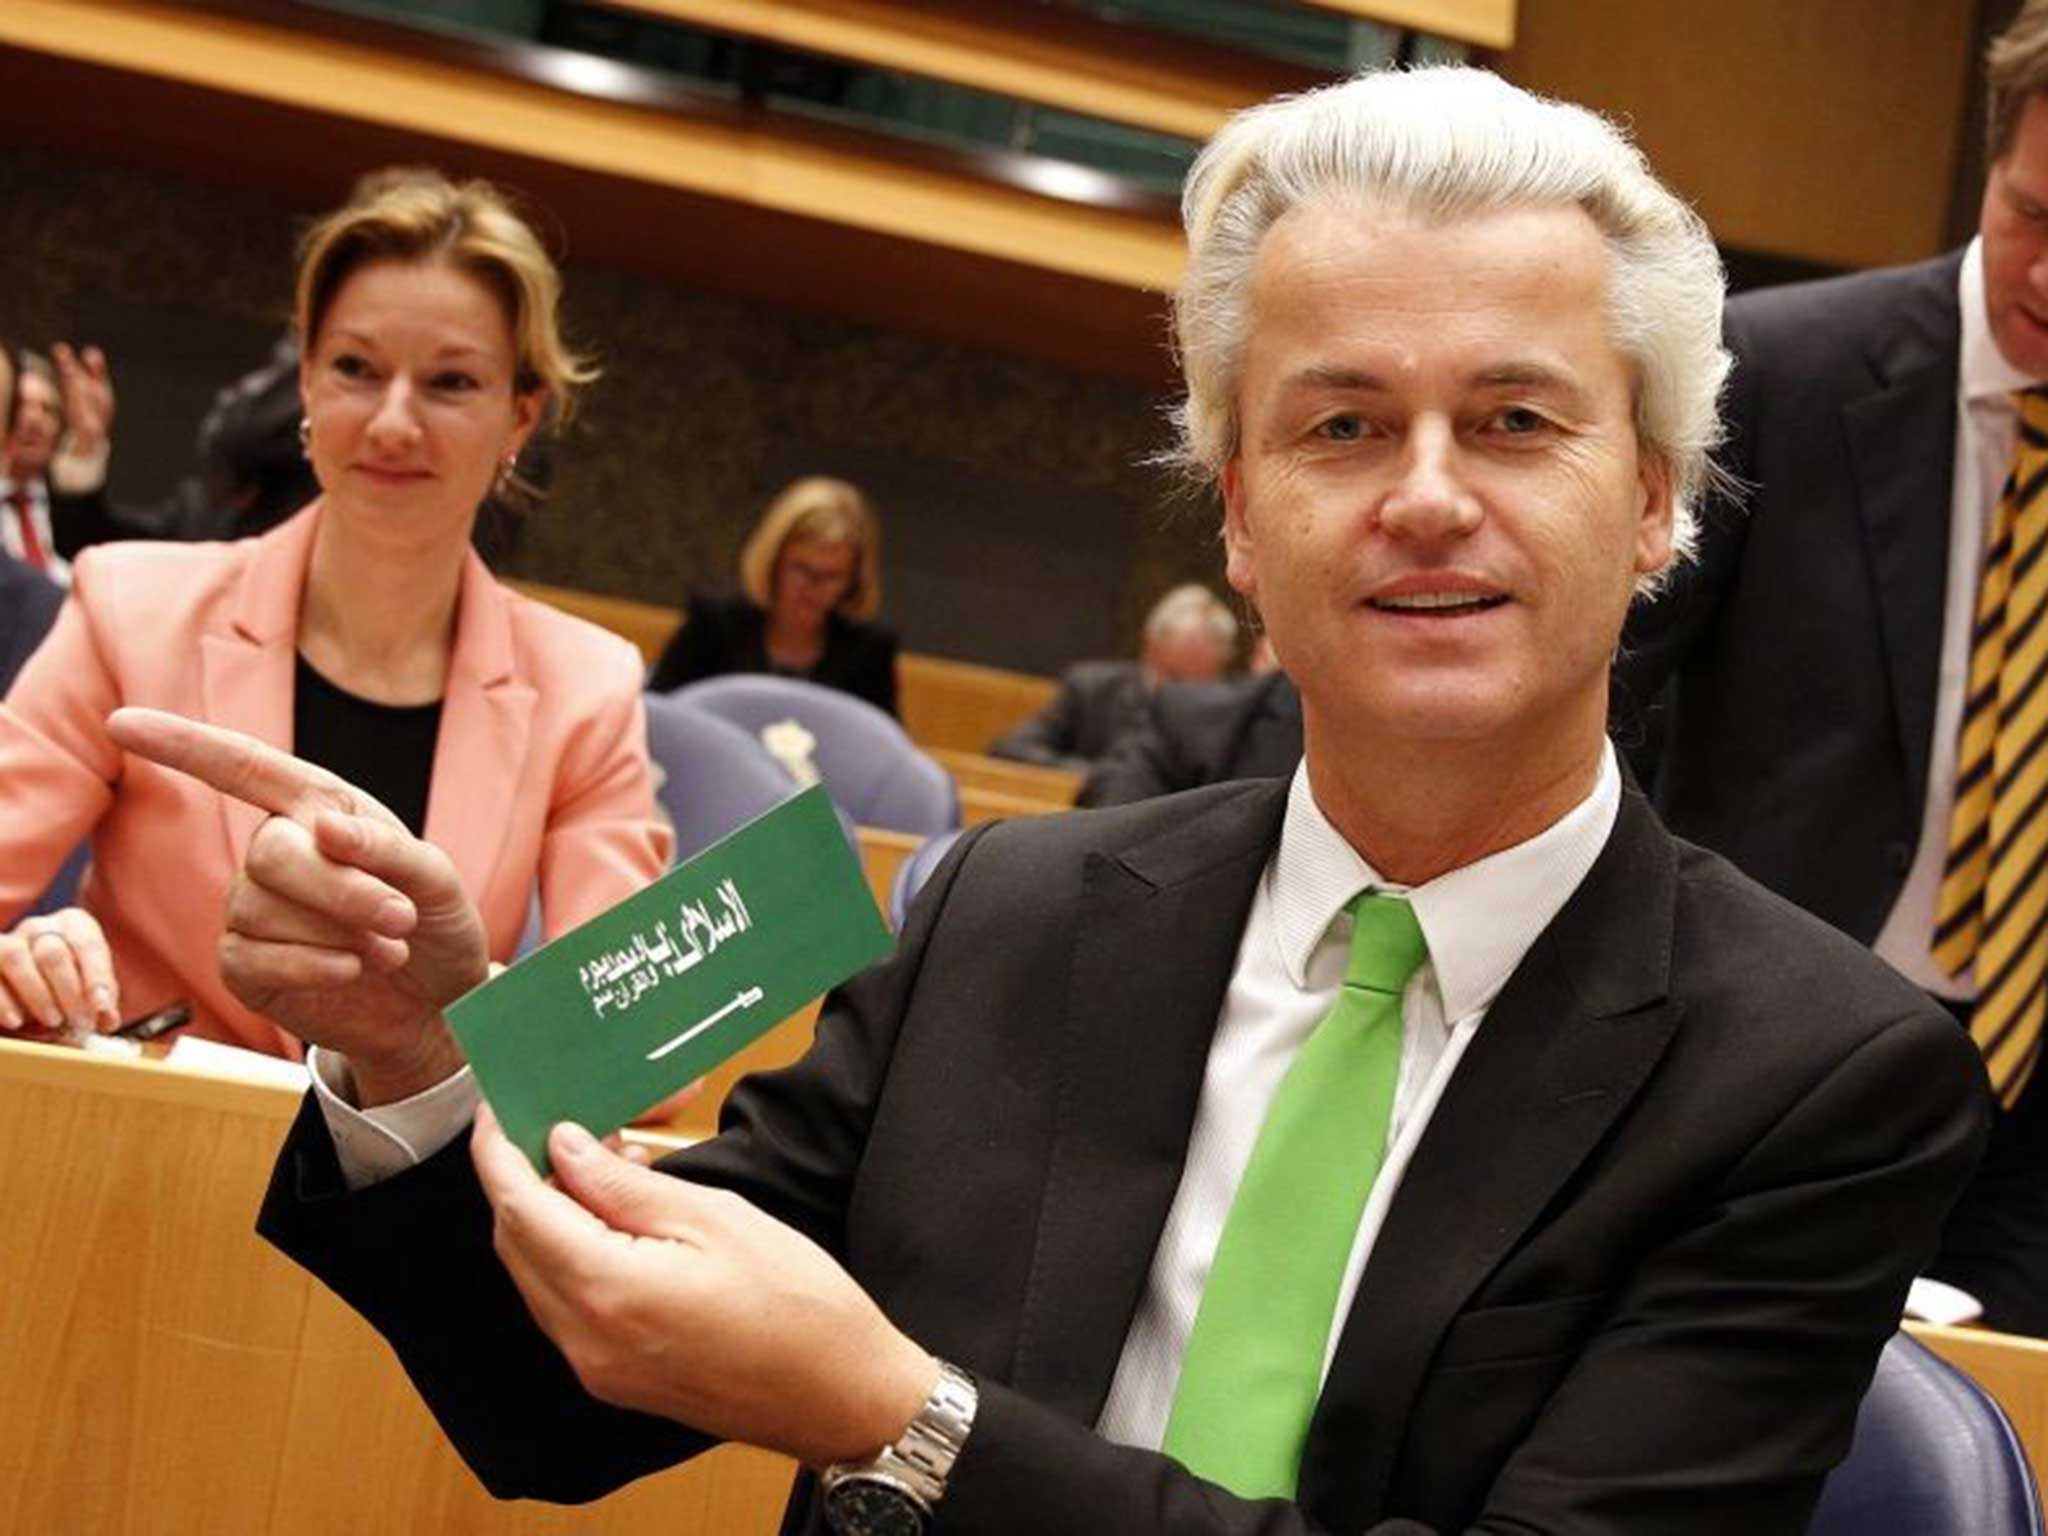 Geert Wilders is unrepentant and insists he was only saying ‘what millions of people think’